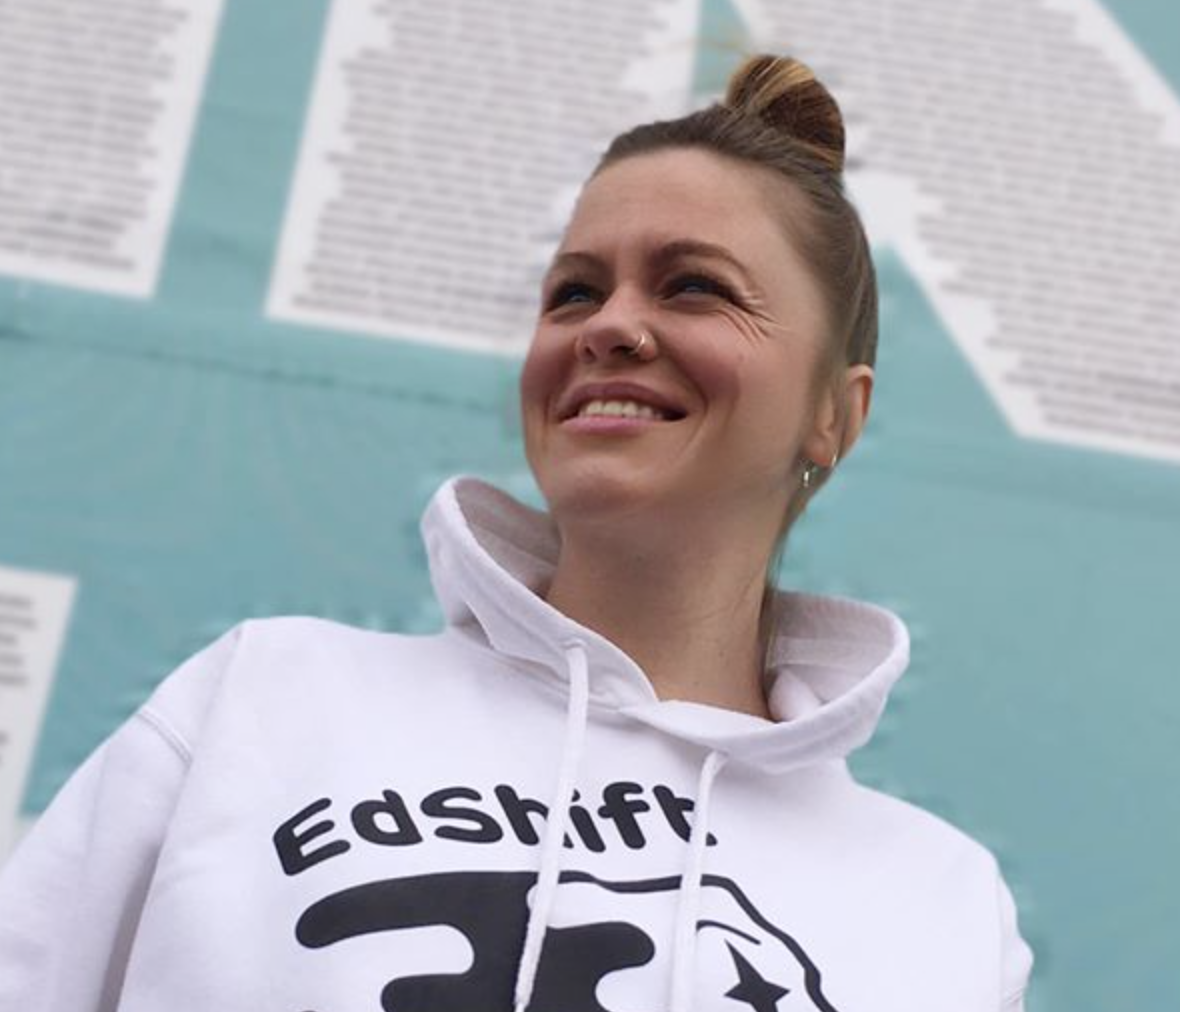 EdShift to receive donations raised by play written by domestic abuse survivor